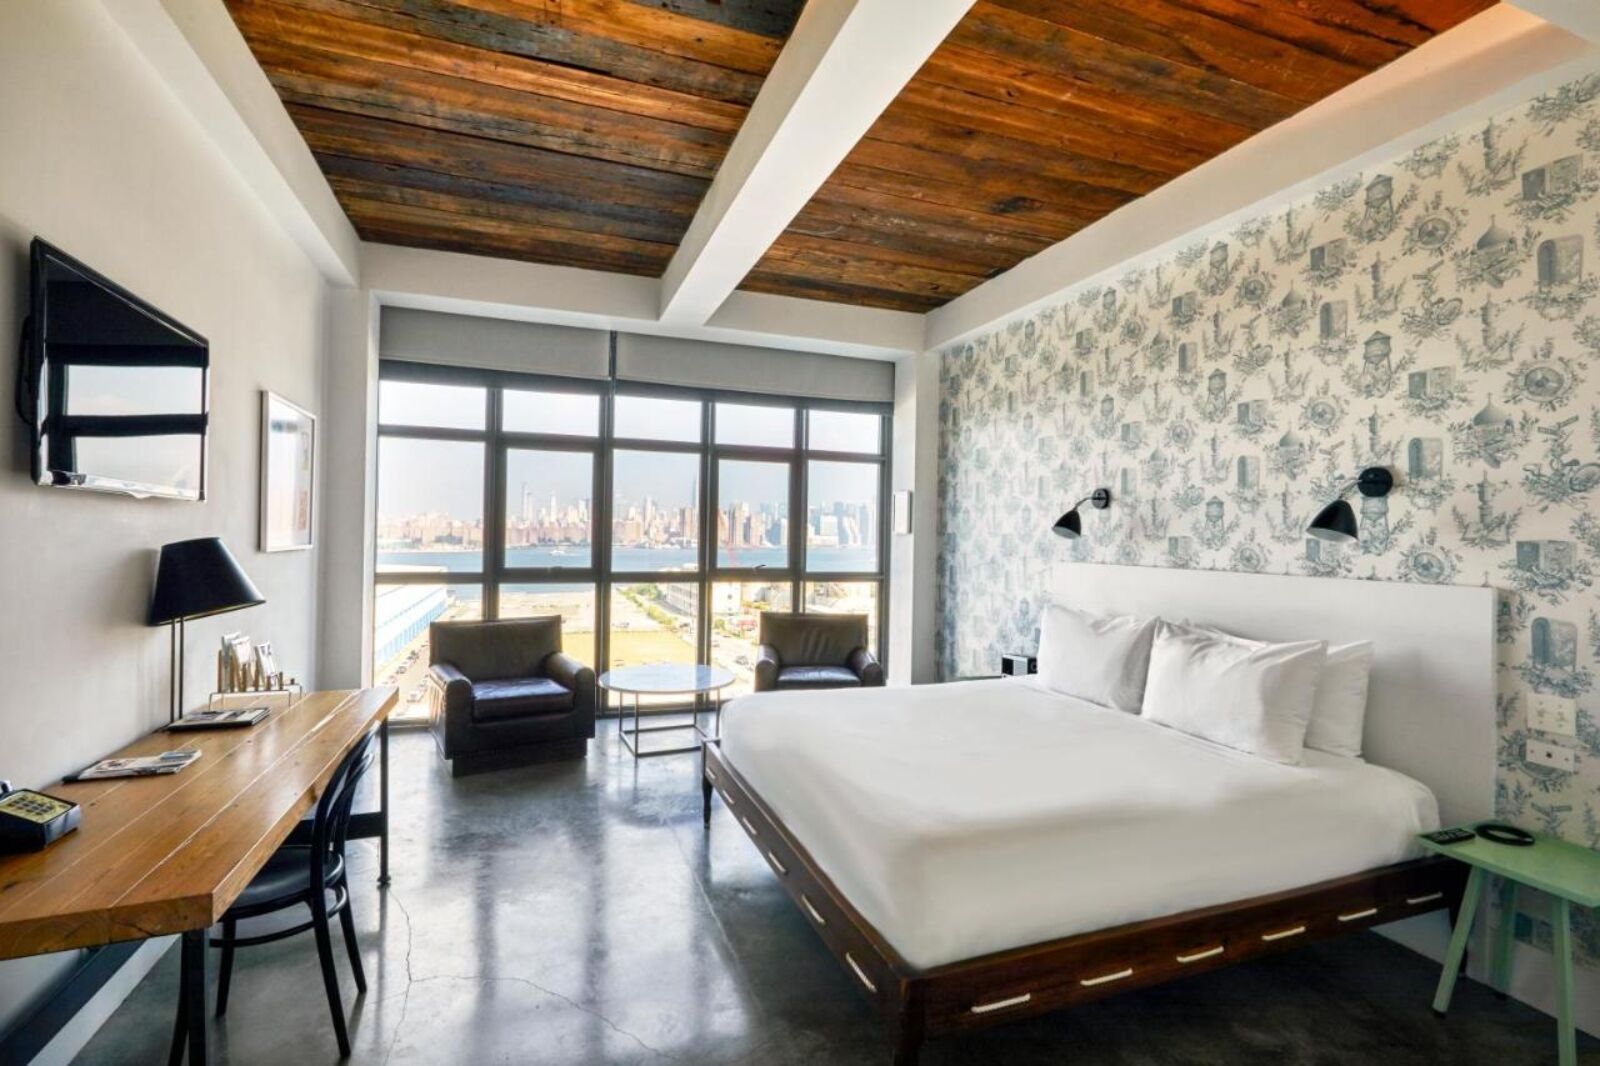 Bedroom in Wythe Hotel a great place to stay when enjoying things to do in nyc